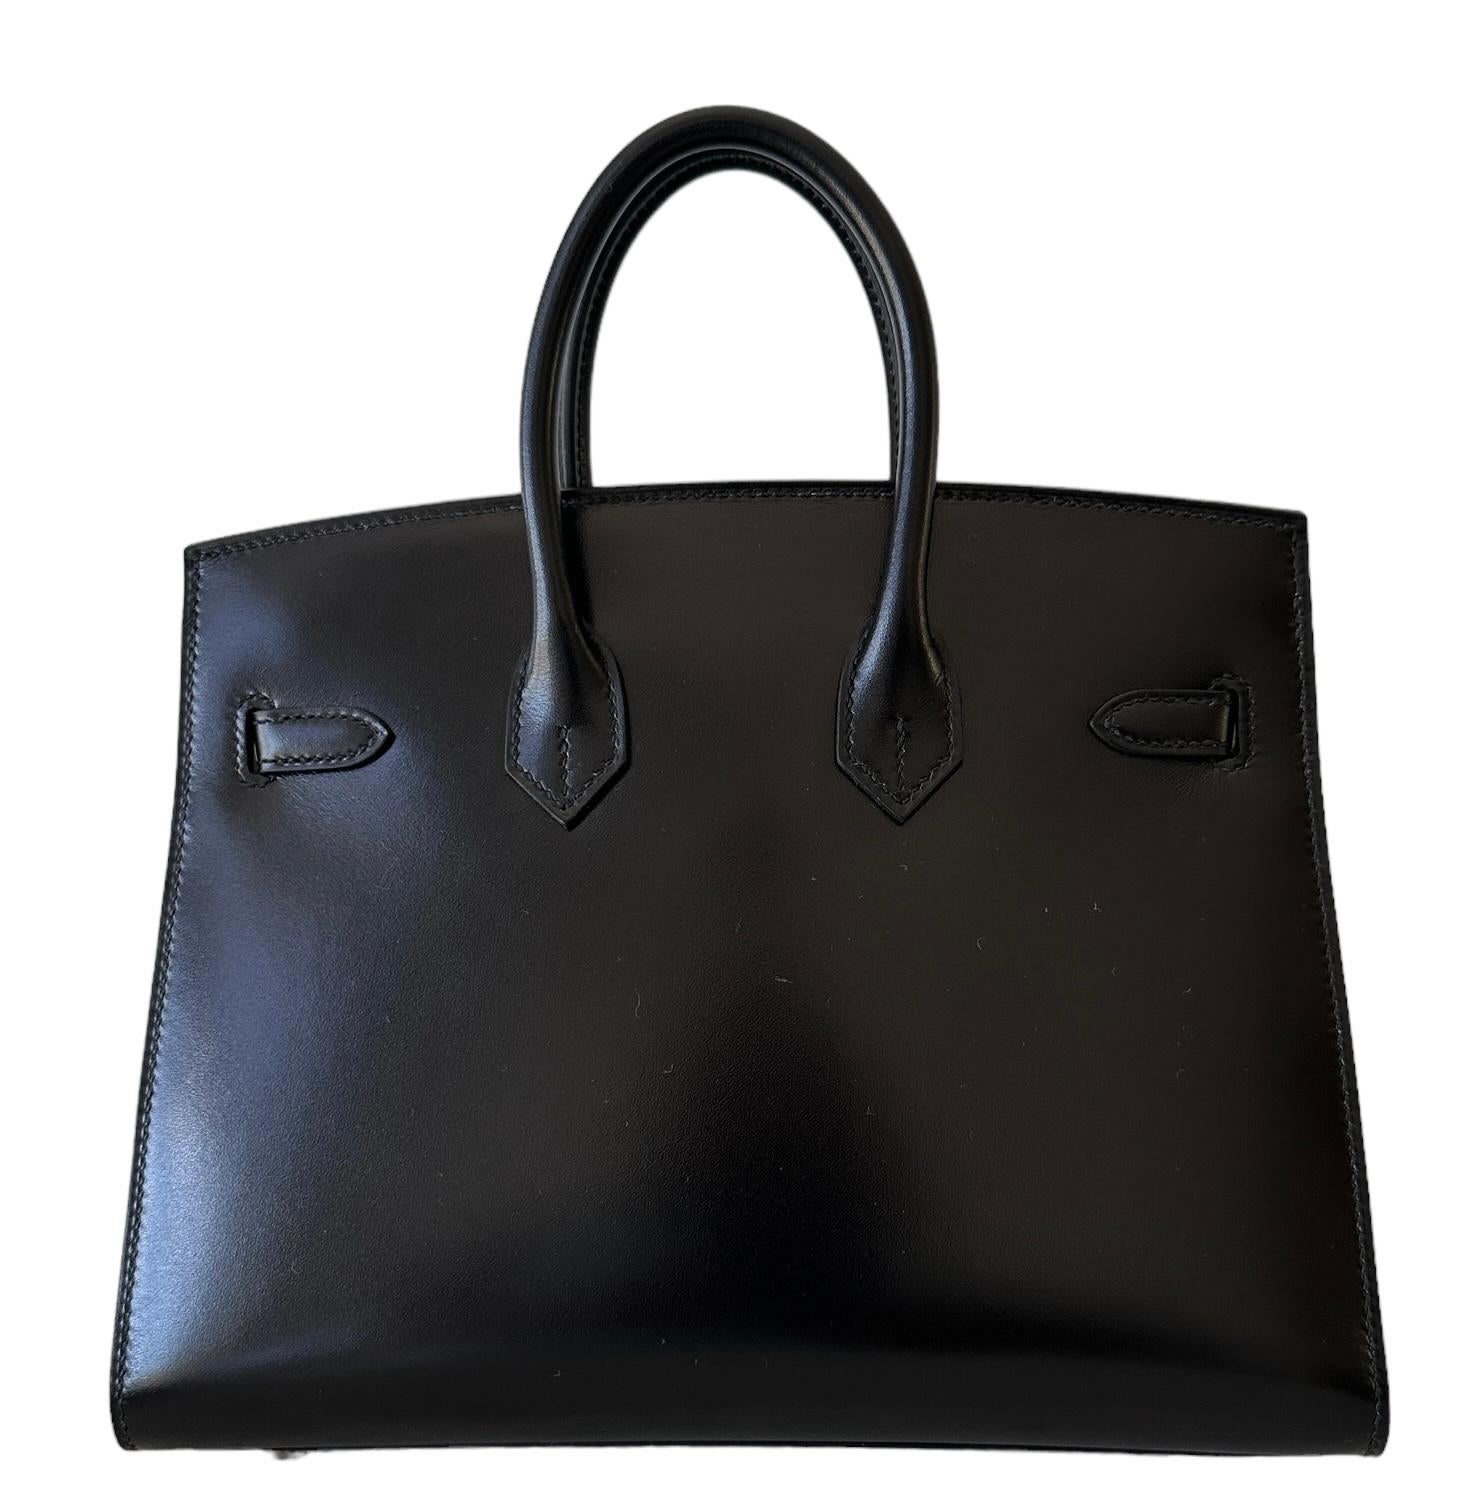 Hermes Birkin 25cm
Sellier Black 
Collectors Dream Bag
Very rare to find Box Leather especially in a Birkin 25 Sellier
Highly Sought after by Hermes Collectors
Gold Hardware
Understanding a Sellier Birkin 
The Hermes Birkin is a luxury handbag from